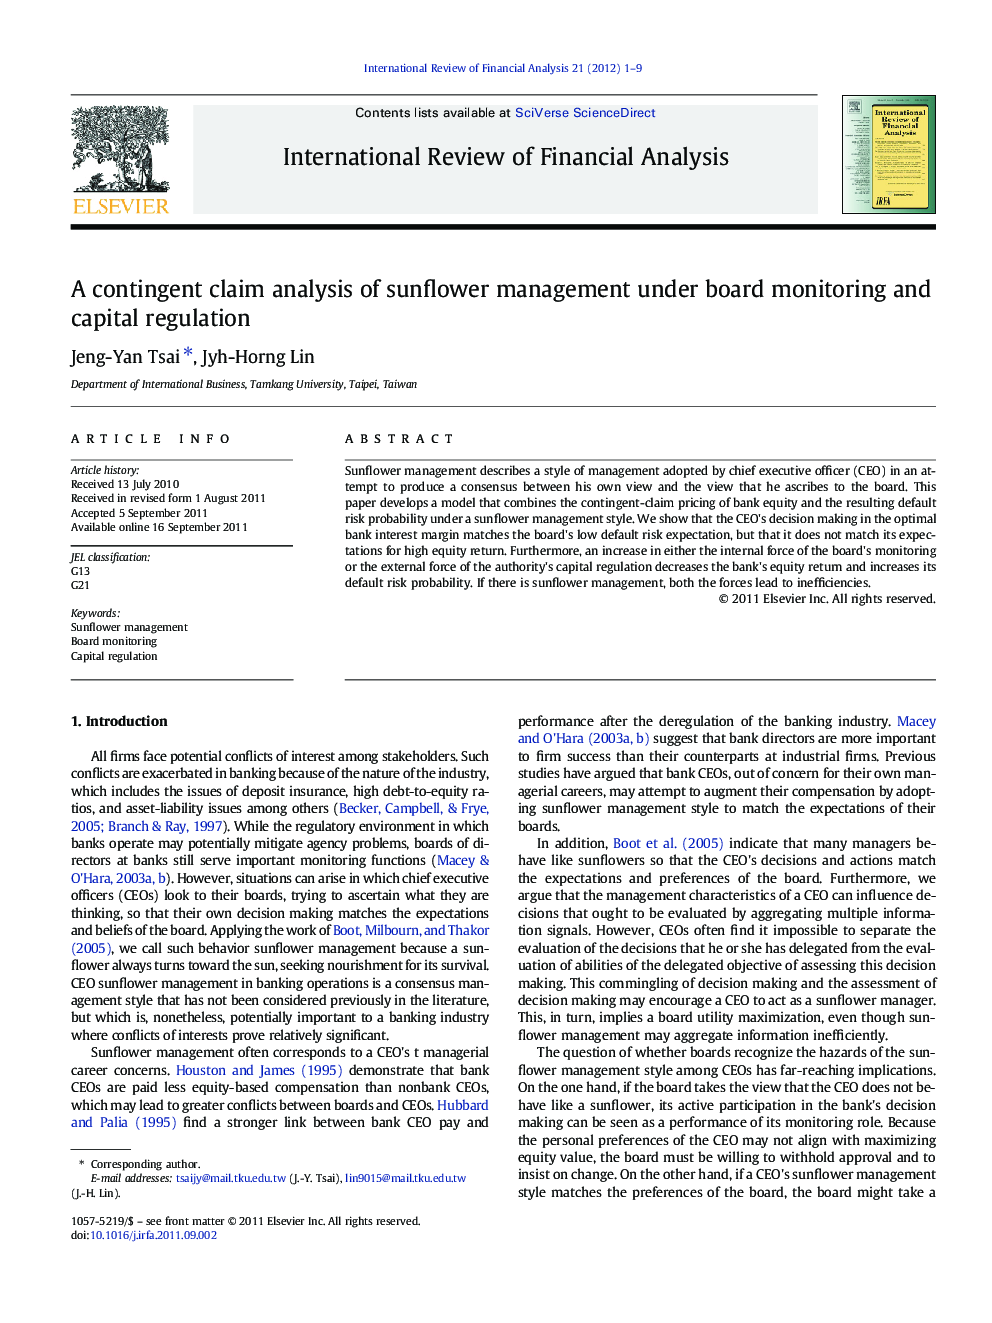 A contingent claim analysis of sunflower management under board monitoring and capital regulation